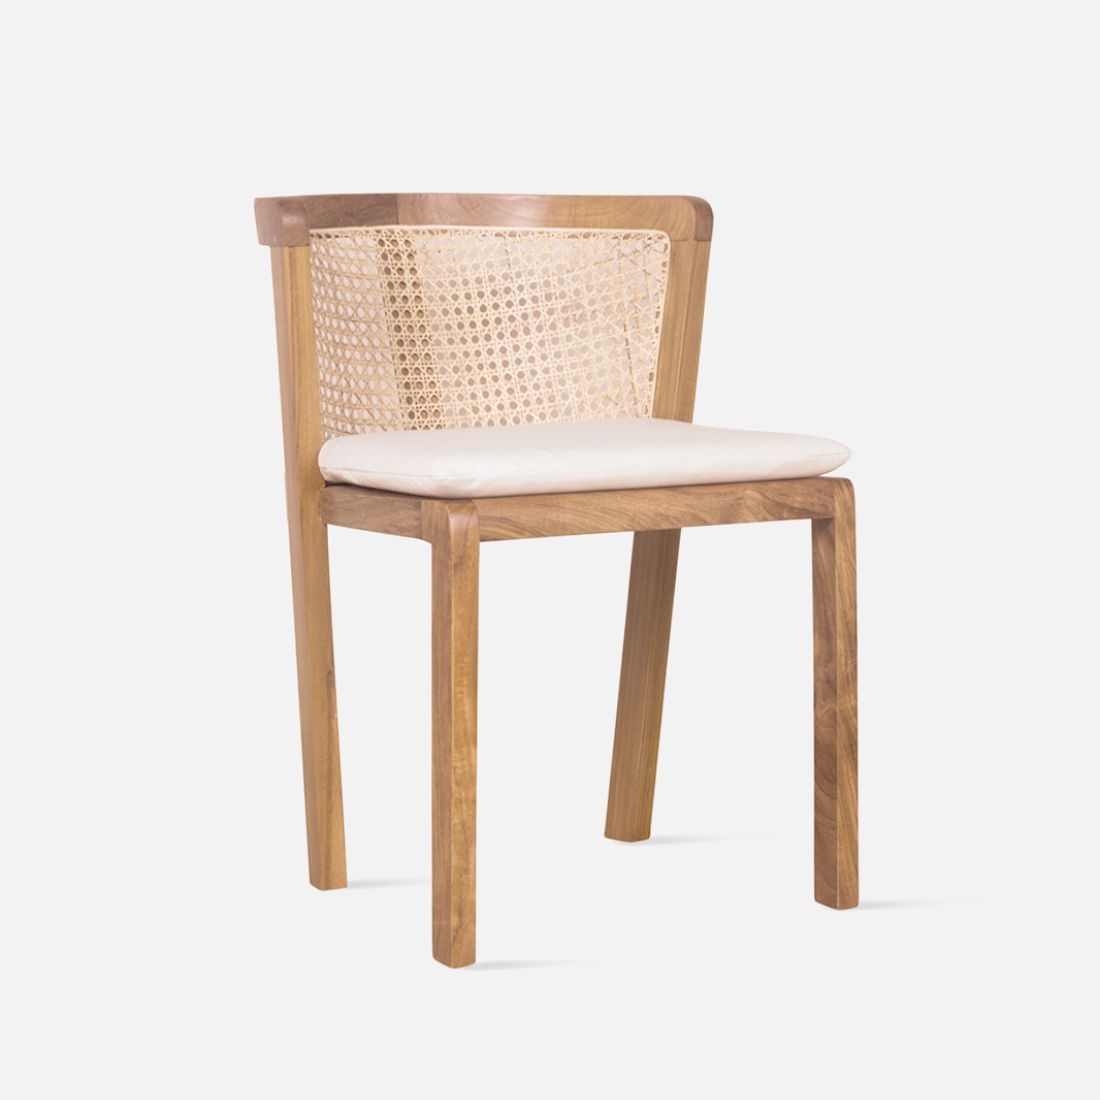 DUAL Dining Chair